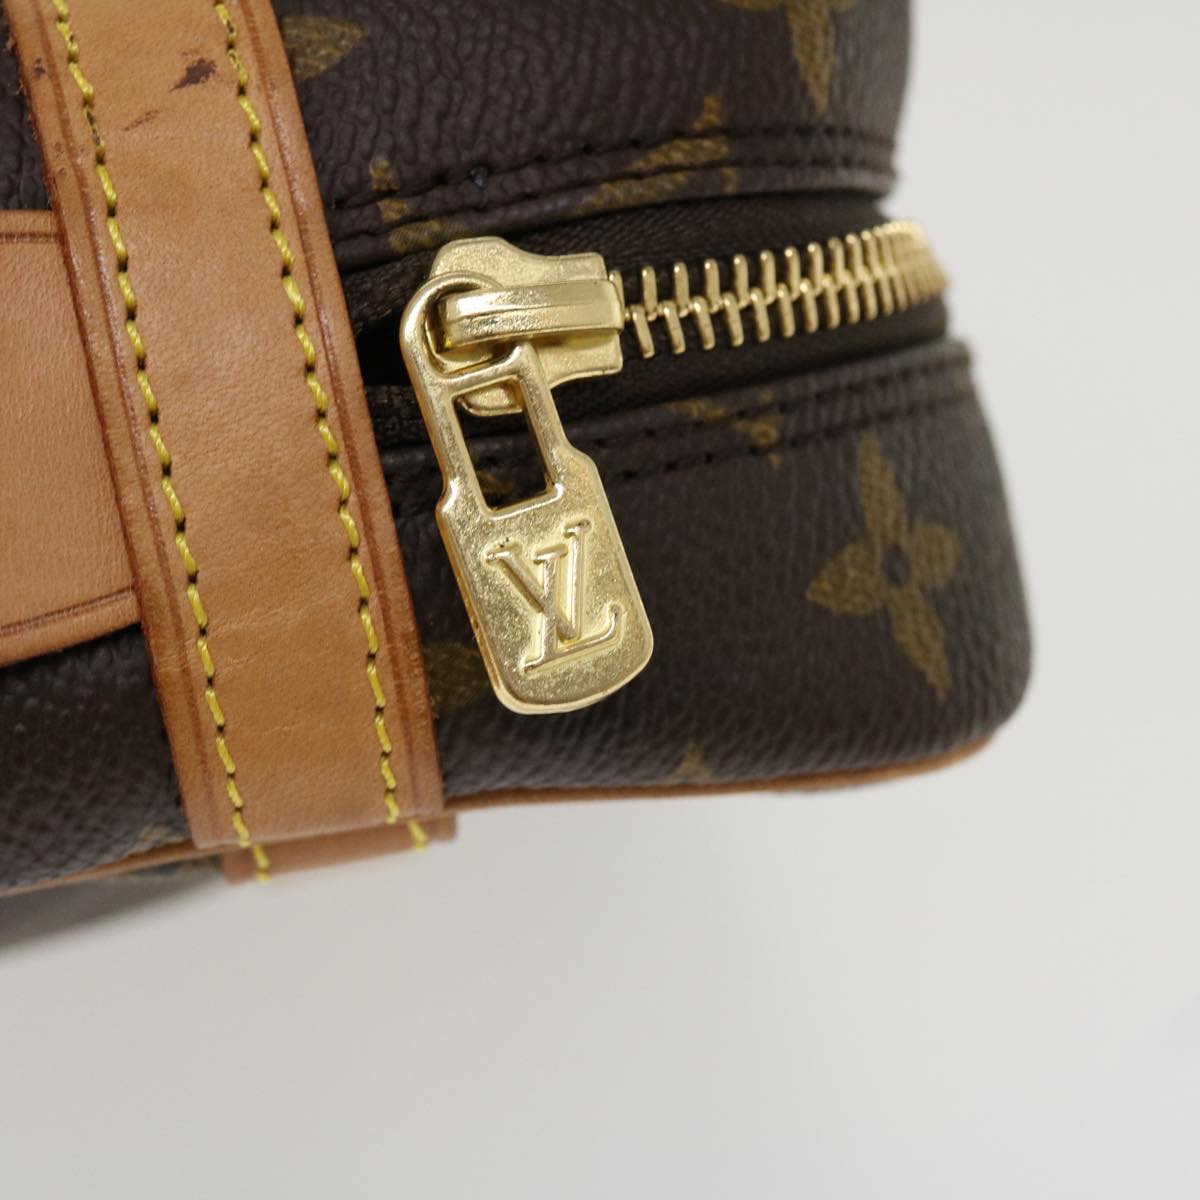 LOUIS VUITTON Compiegne 28 clutch second bag M51845｜Product  Code：2107400159838｜BRAND OFF Online Store